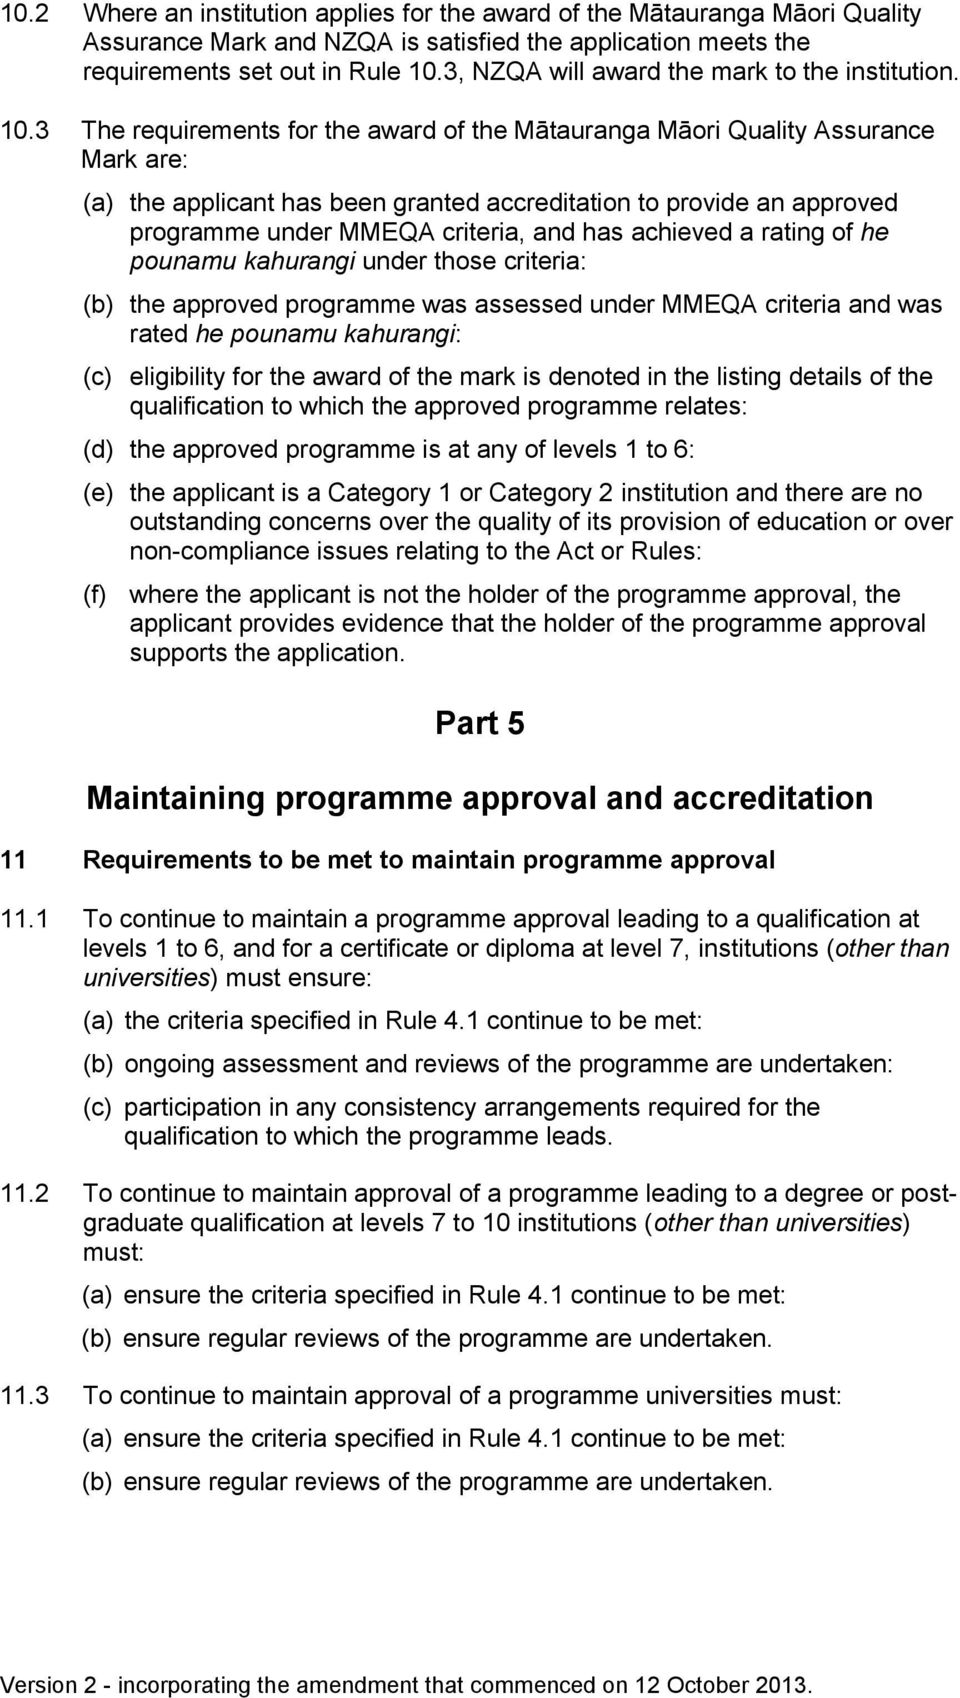 3 The requirements for the award of the Mātauranga Māori Quality Assurance Mark are: (a) the applicant has been granted accreditation to provide an approved programme under MMEQA criteria, and has